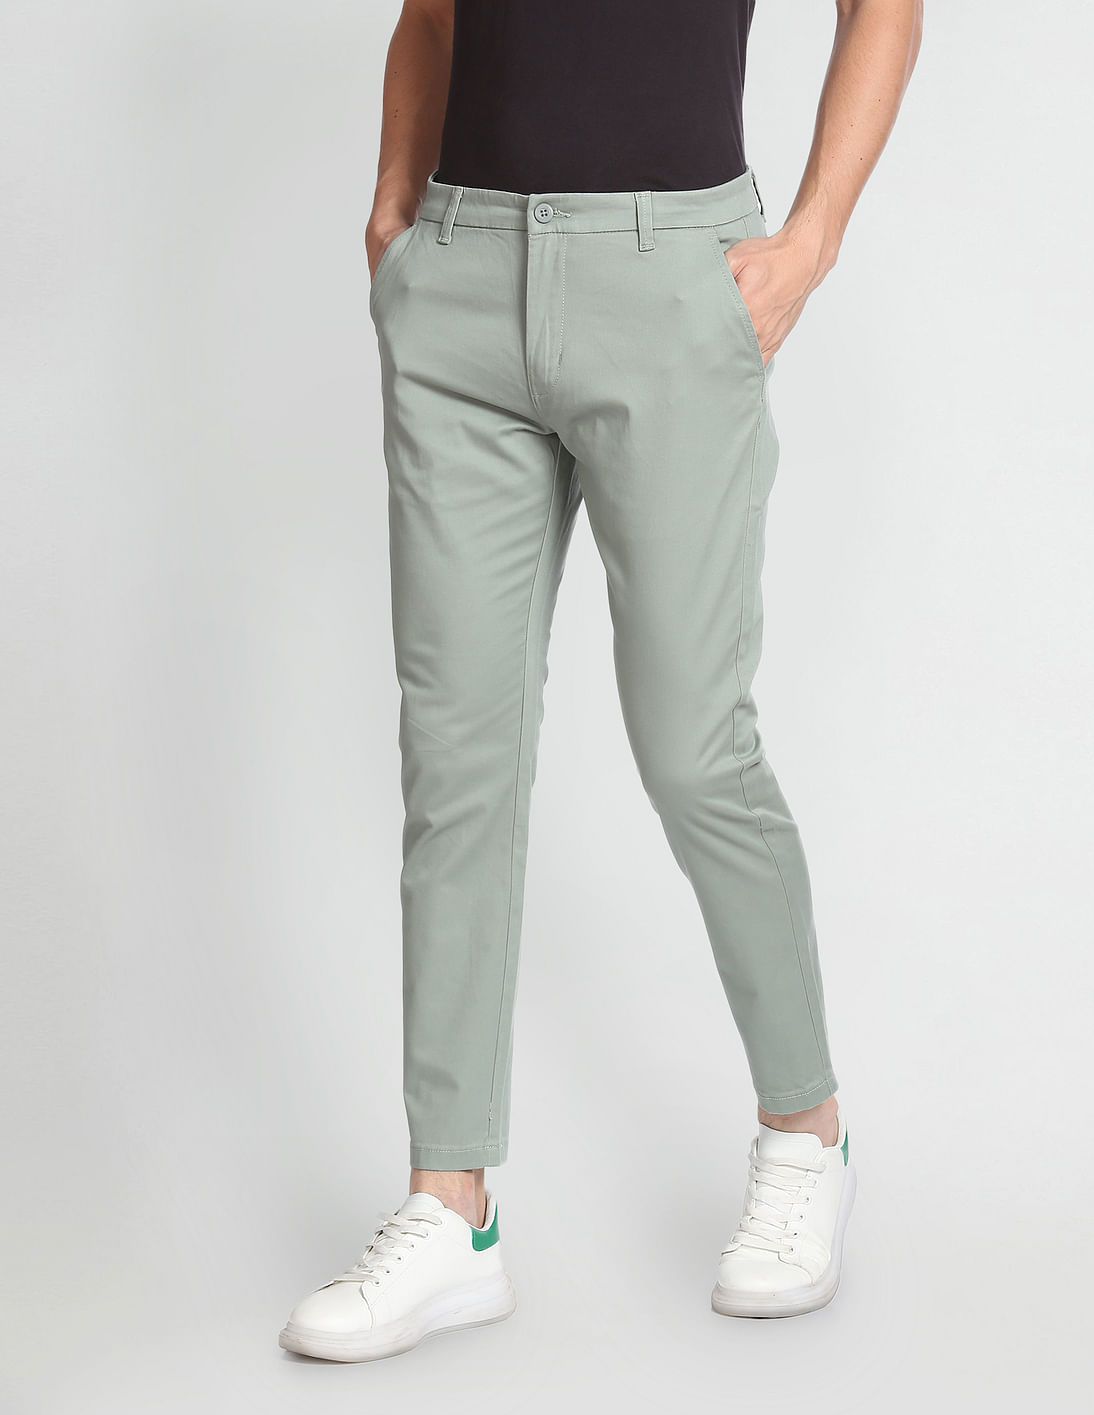 Buy Flying Machine Slim Tapered Solid Trousers - NNNOW.com